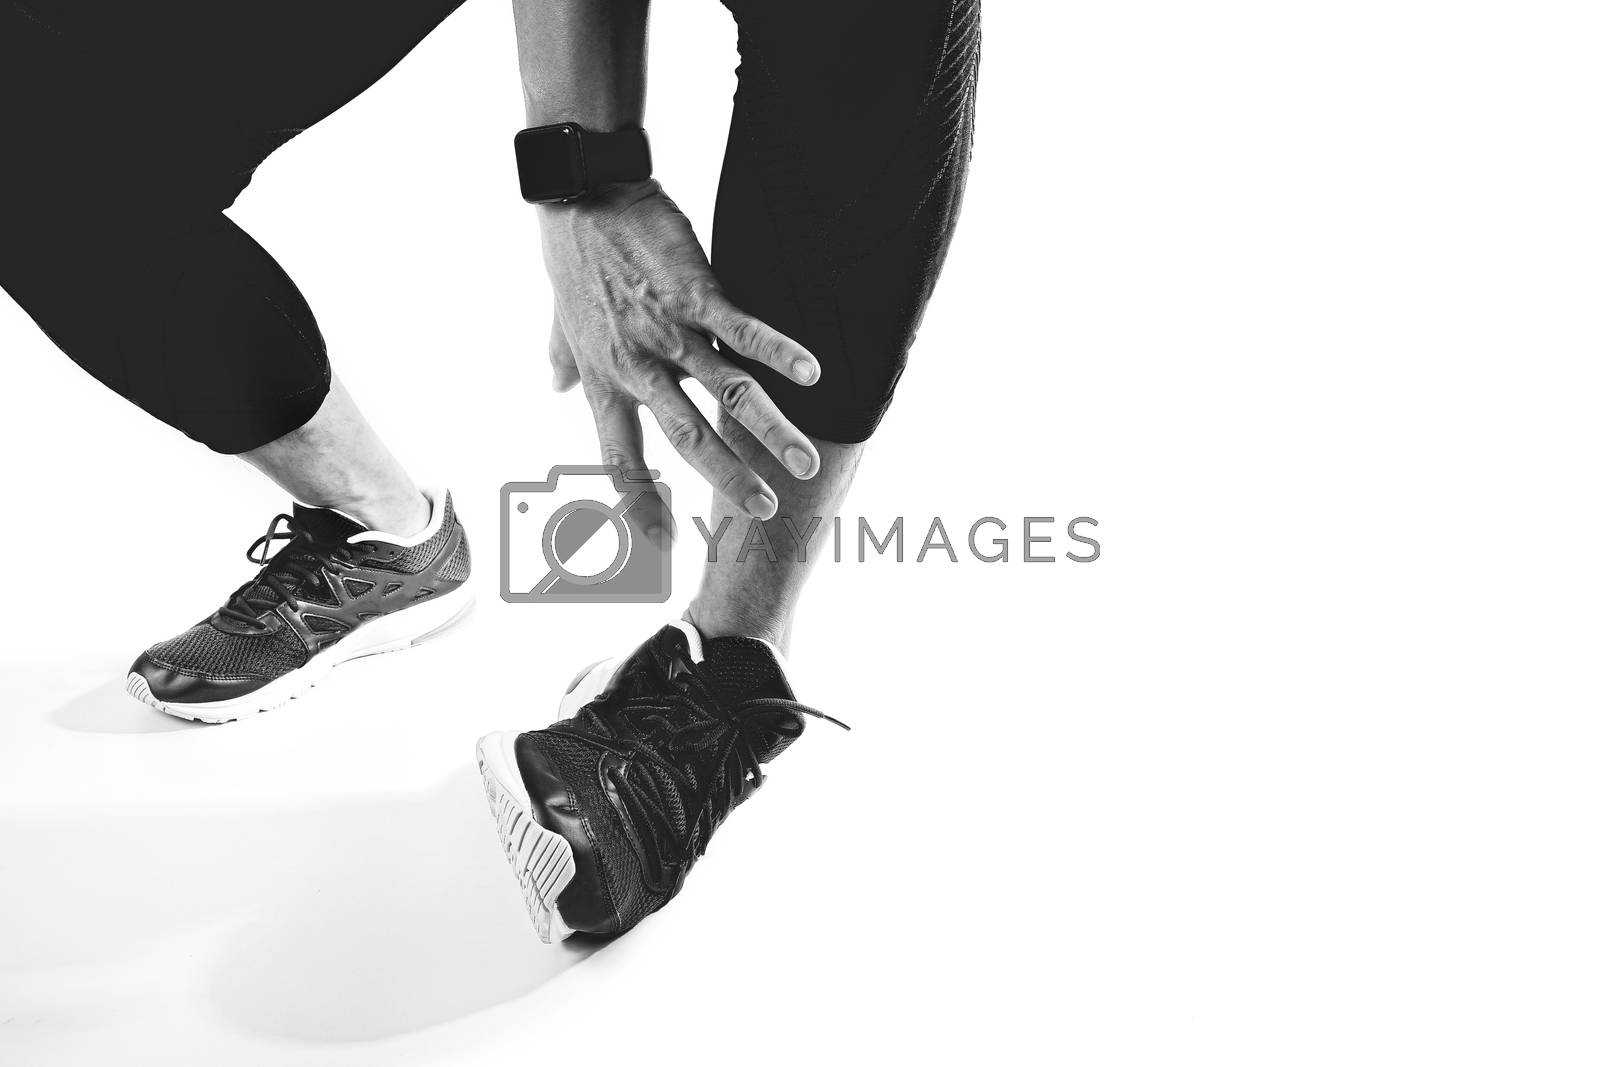 Royalty free image of Runner sportsman holding ankle in pain with Broken twisted joint by everythingpossible